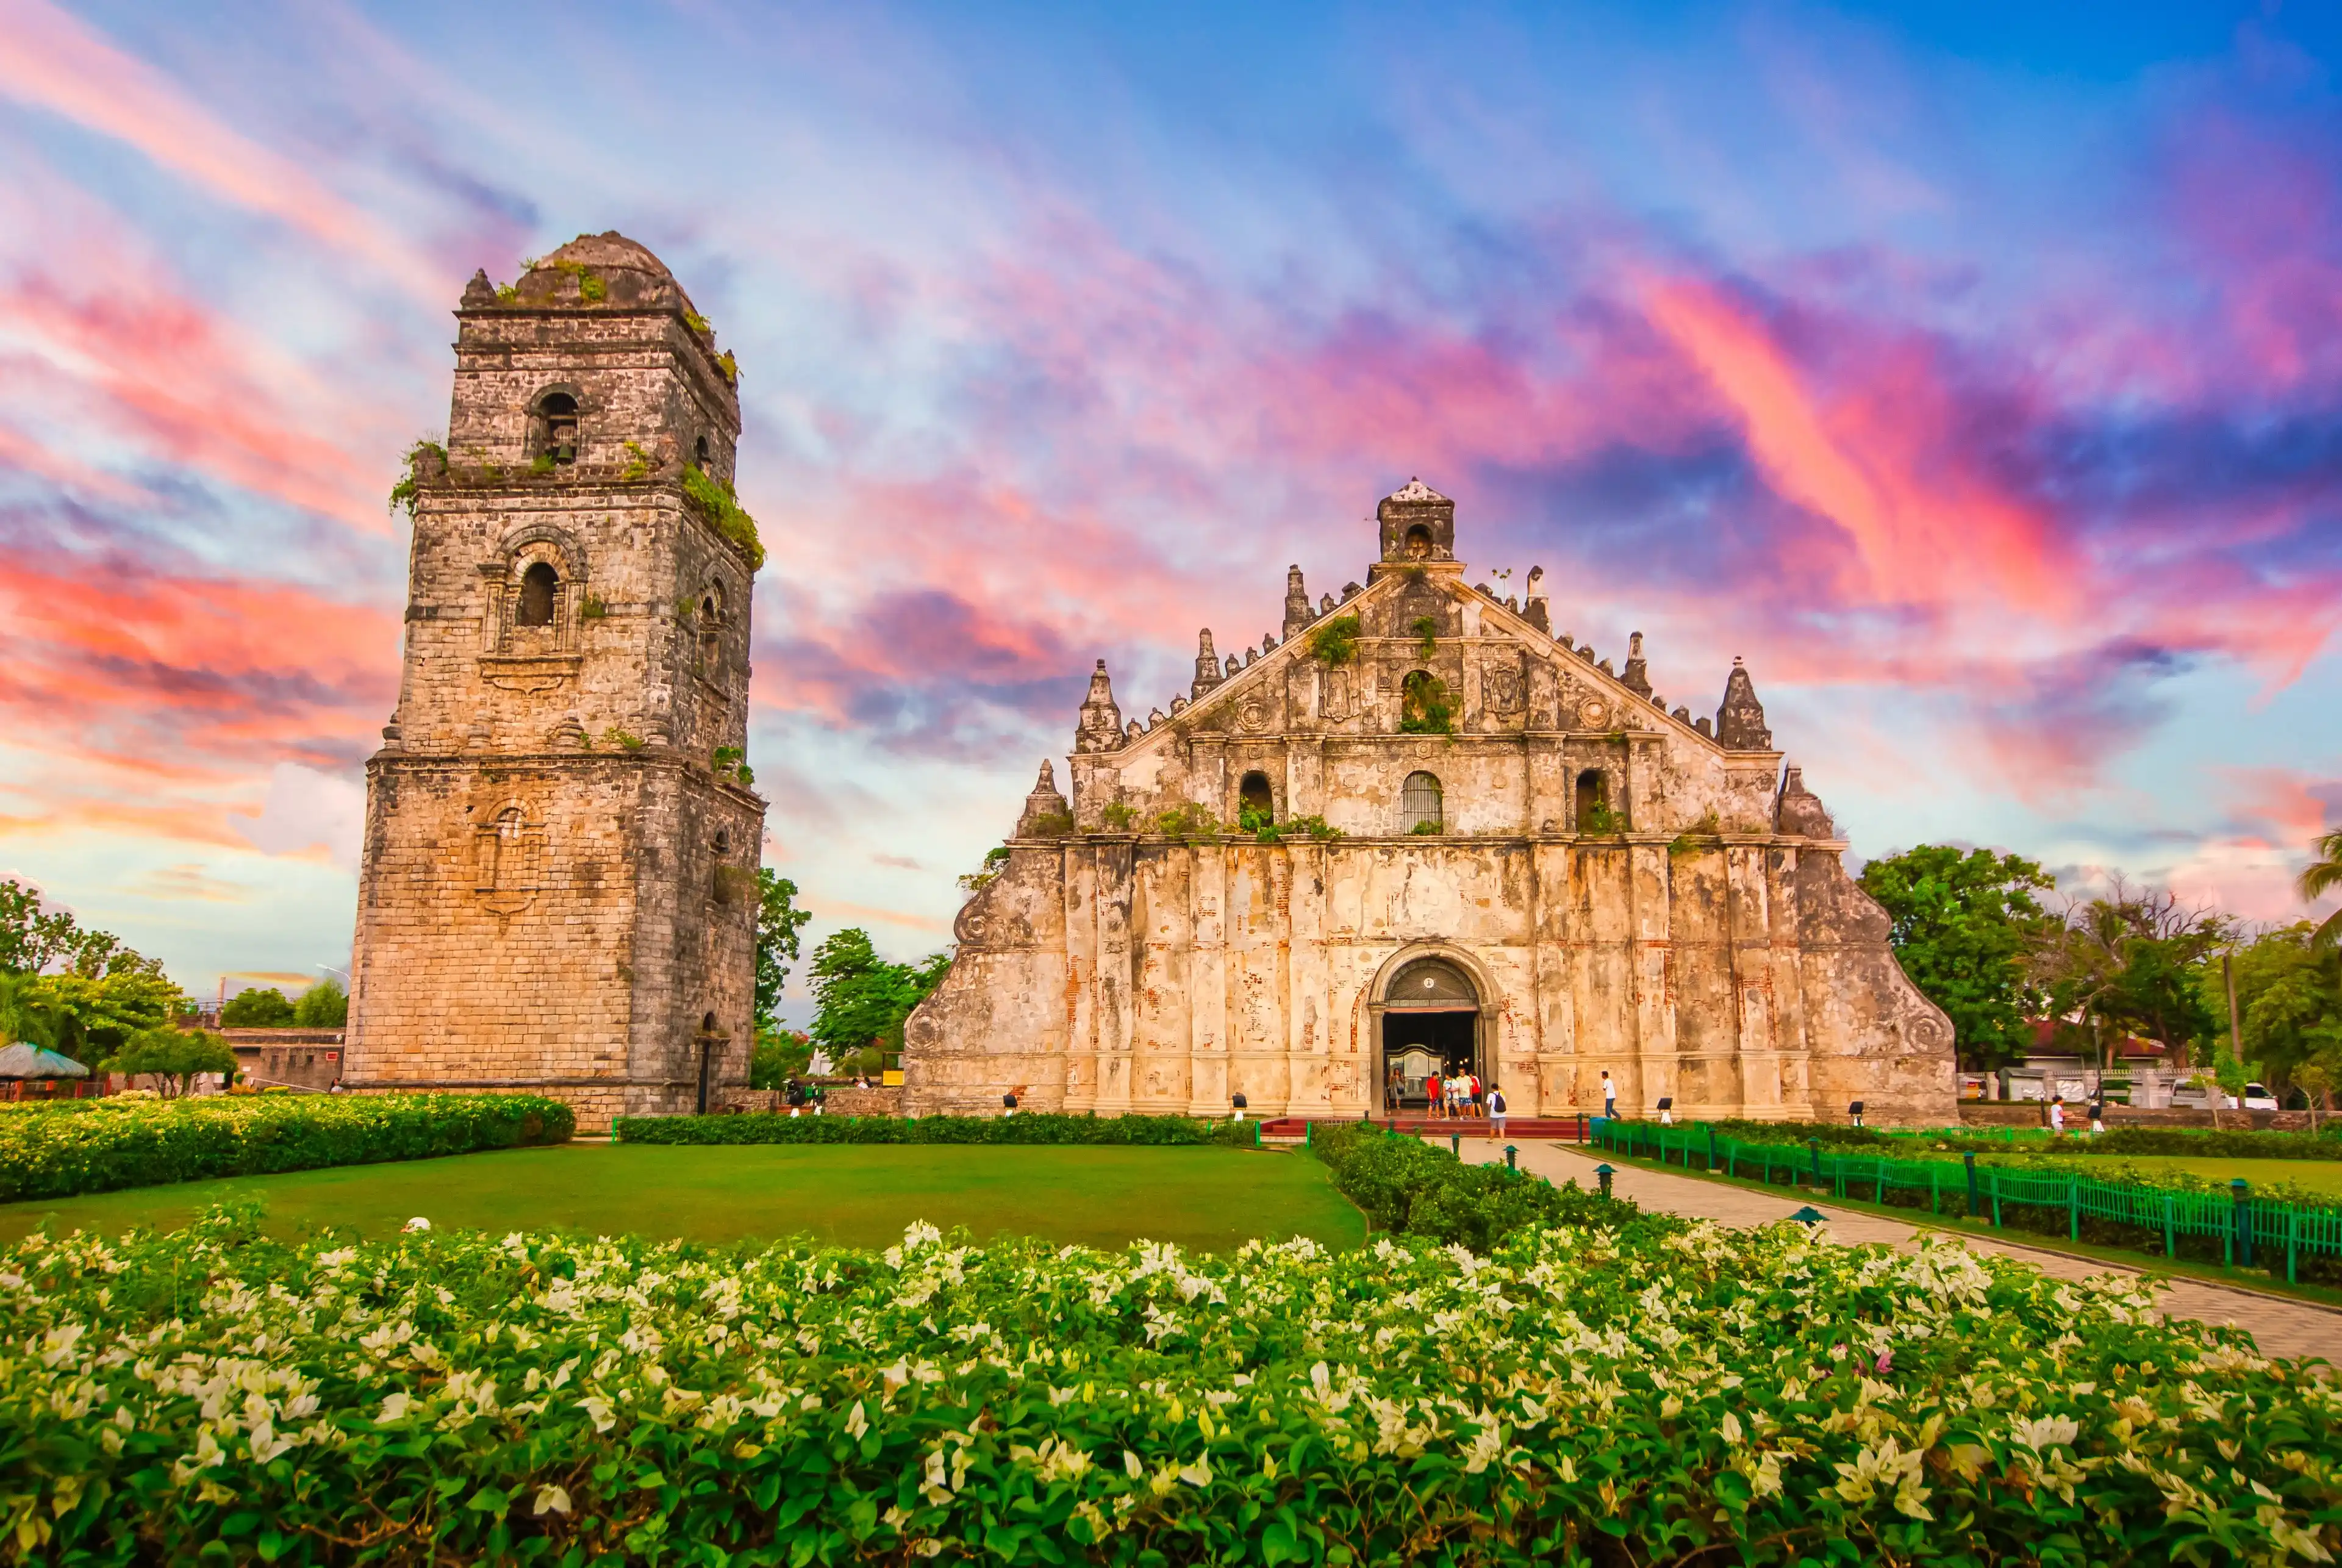 Baroque church of Paoay, Vigan, Ilocos Sur. One of several UNESCO heritage church in the Philippines.